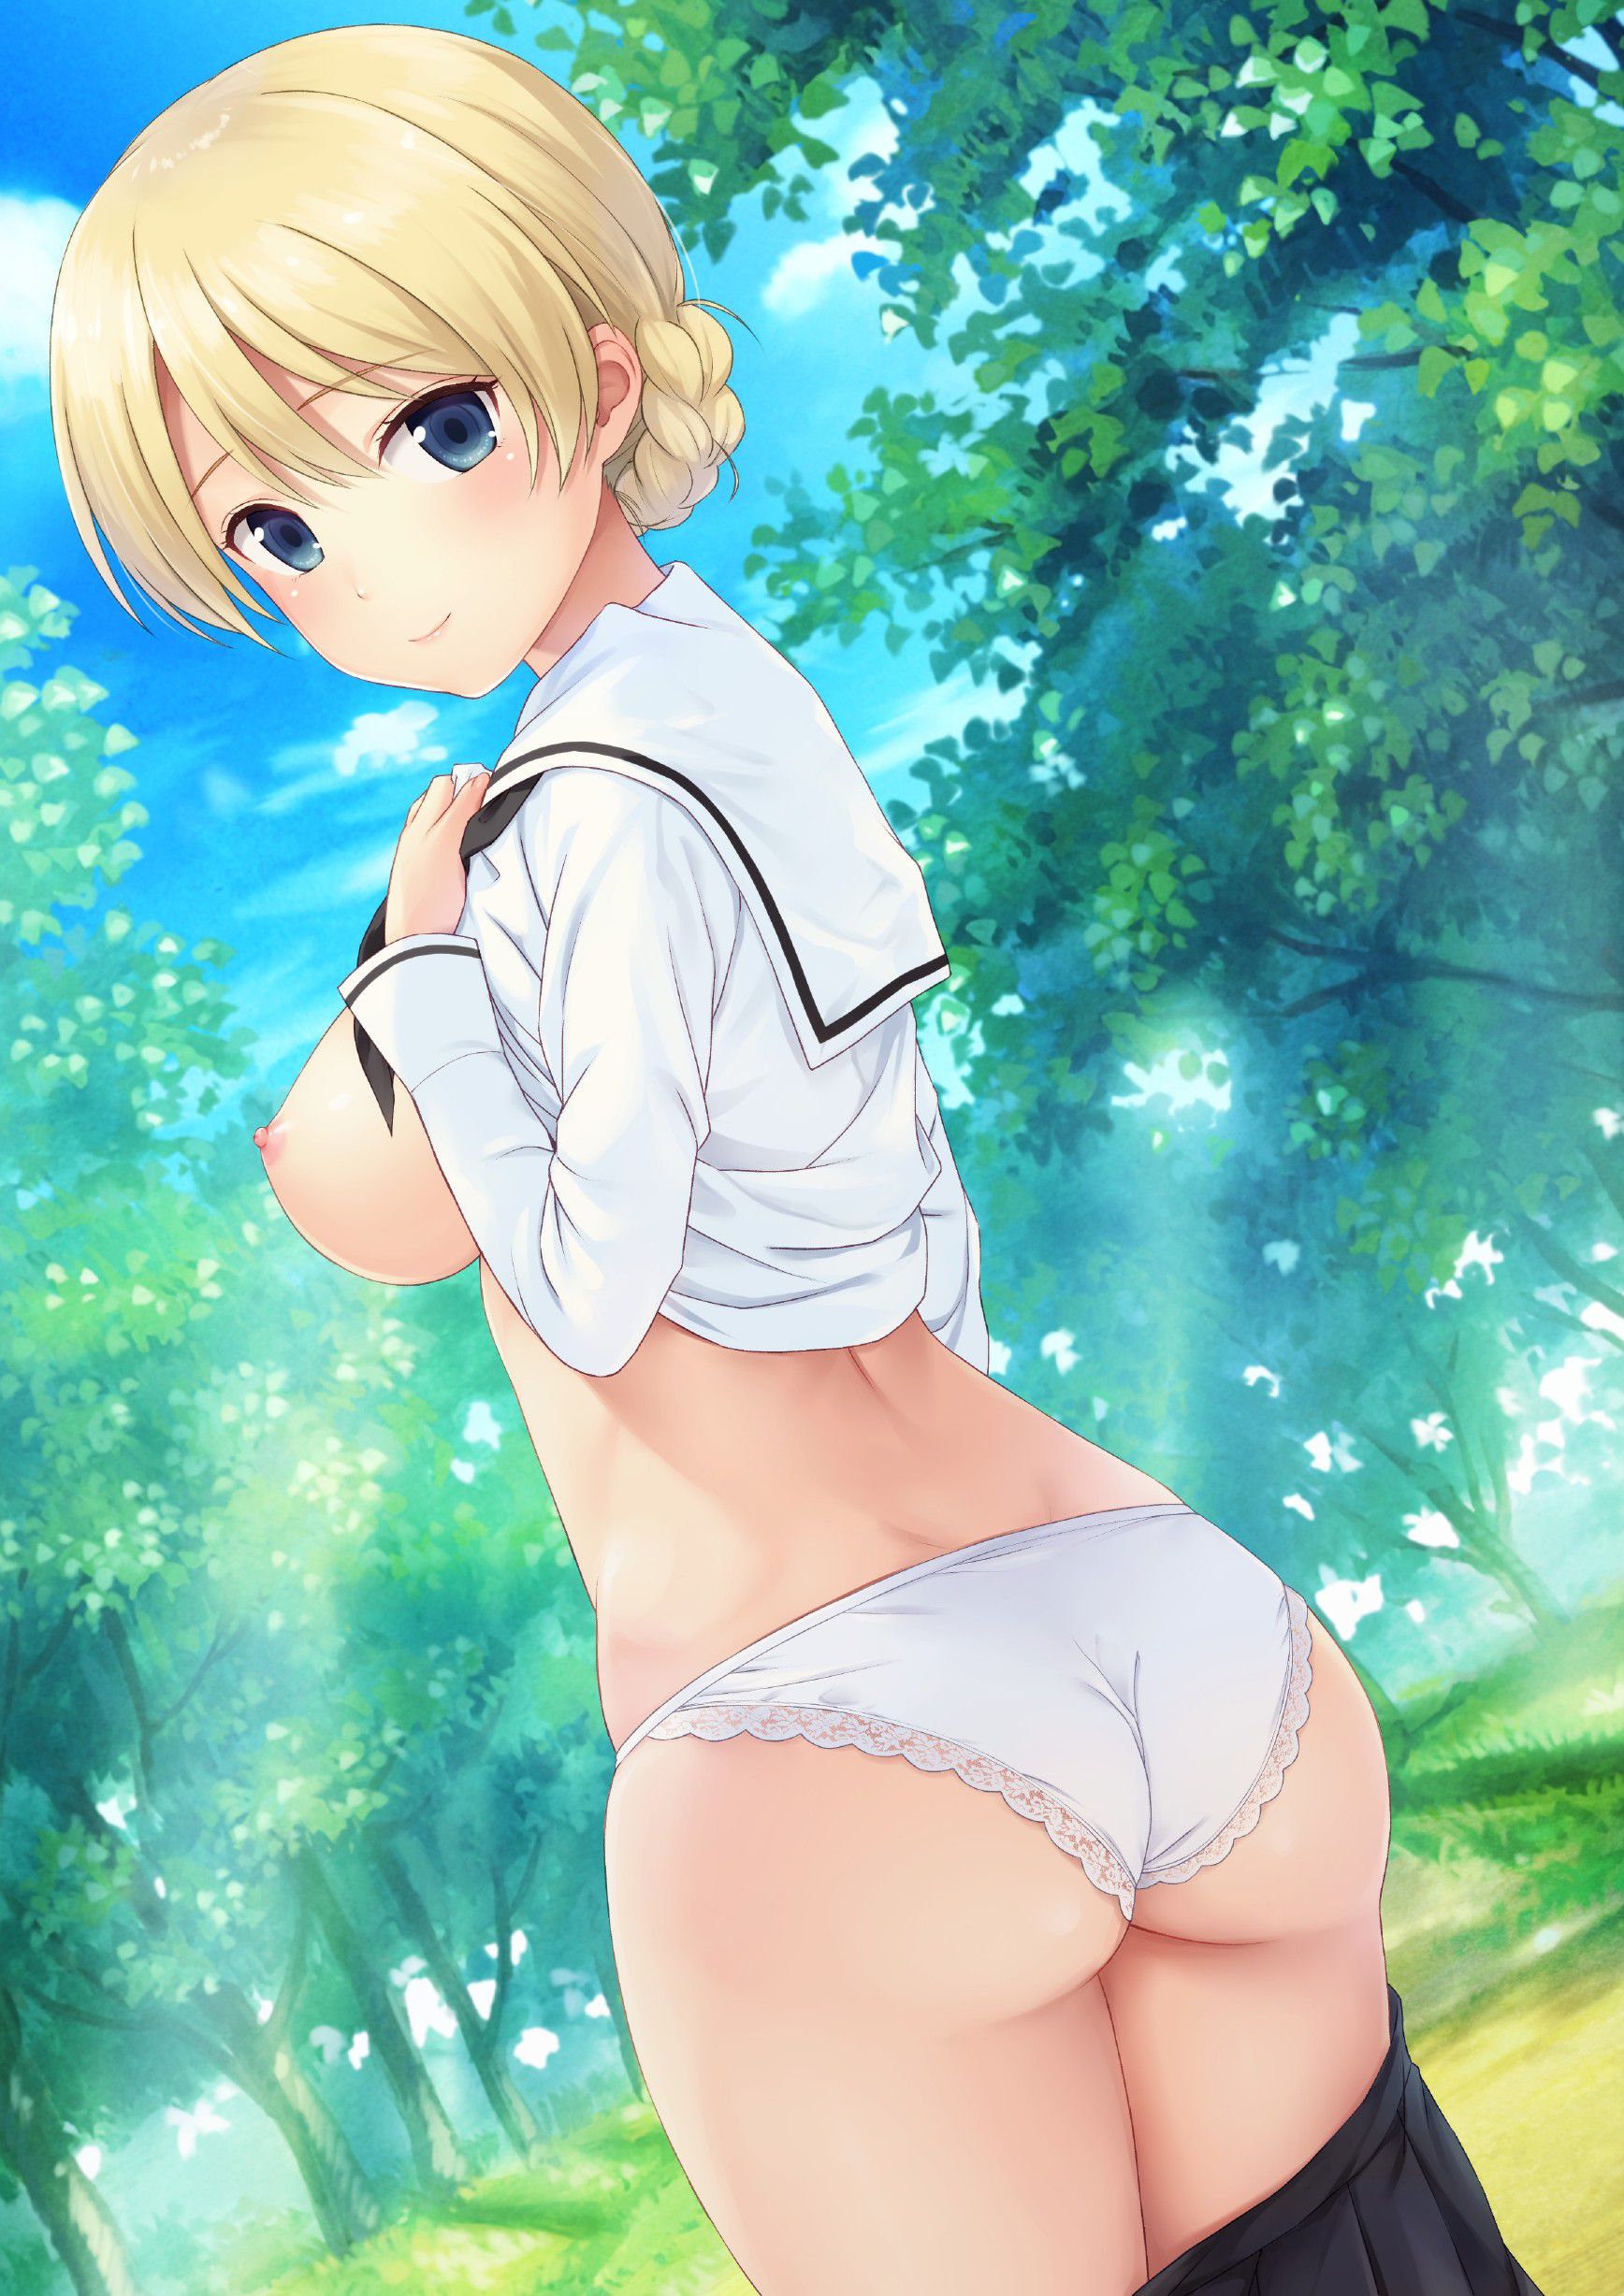 Erotic anime summary Erotic images of characters appearing in girls and Panzer [secondary erotic] 21